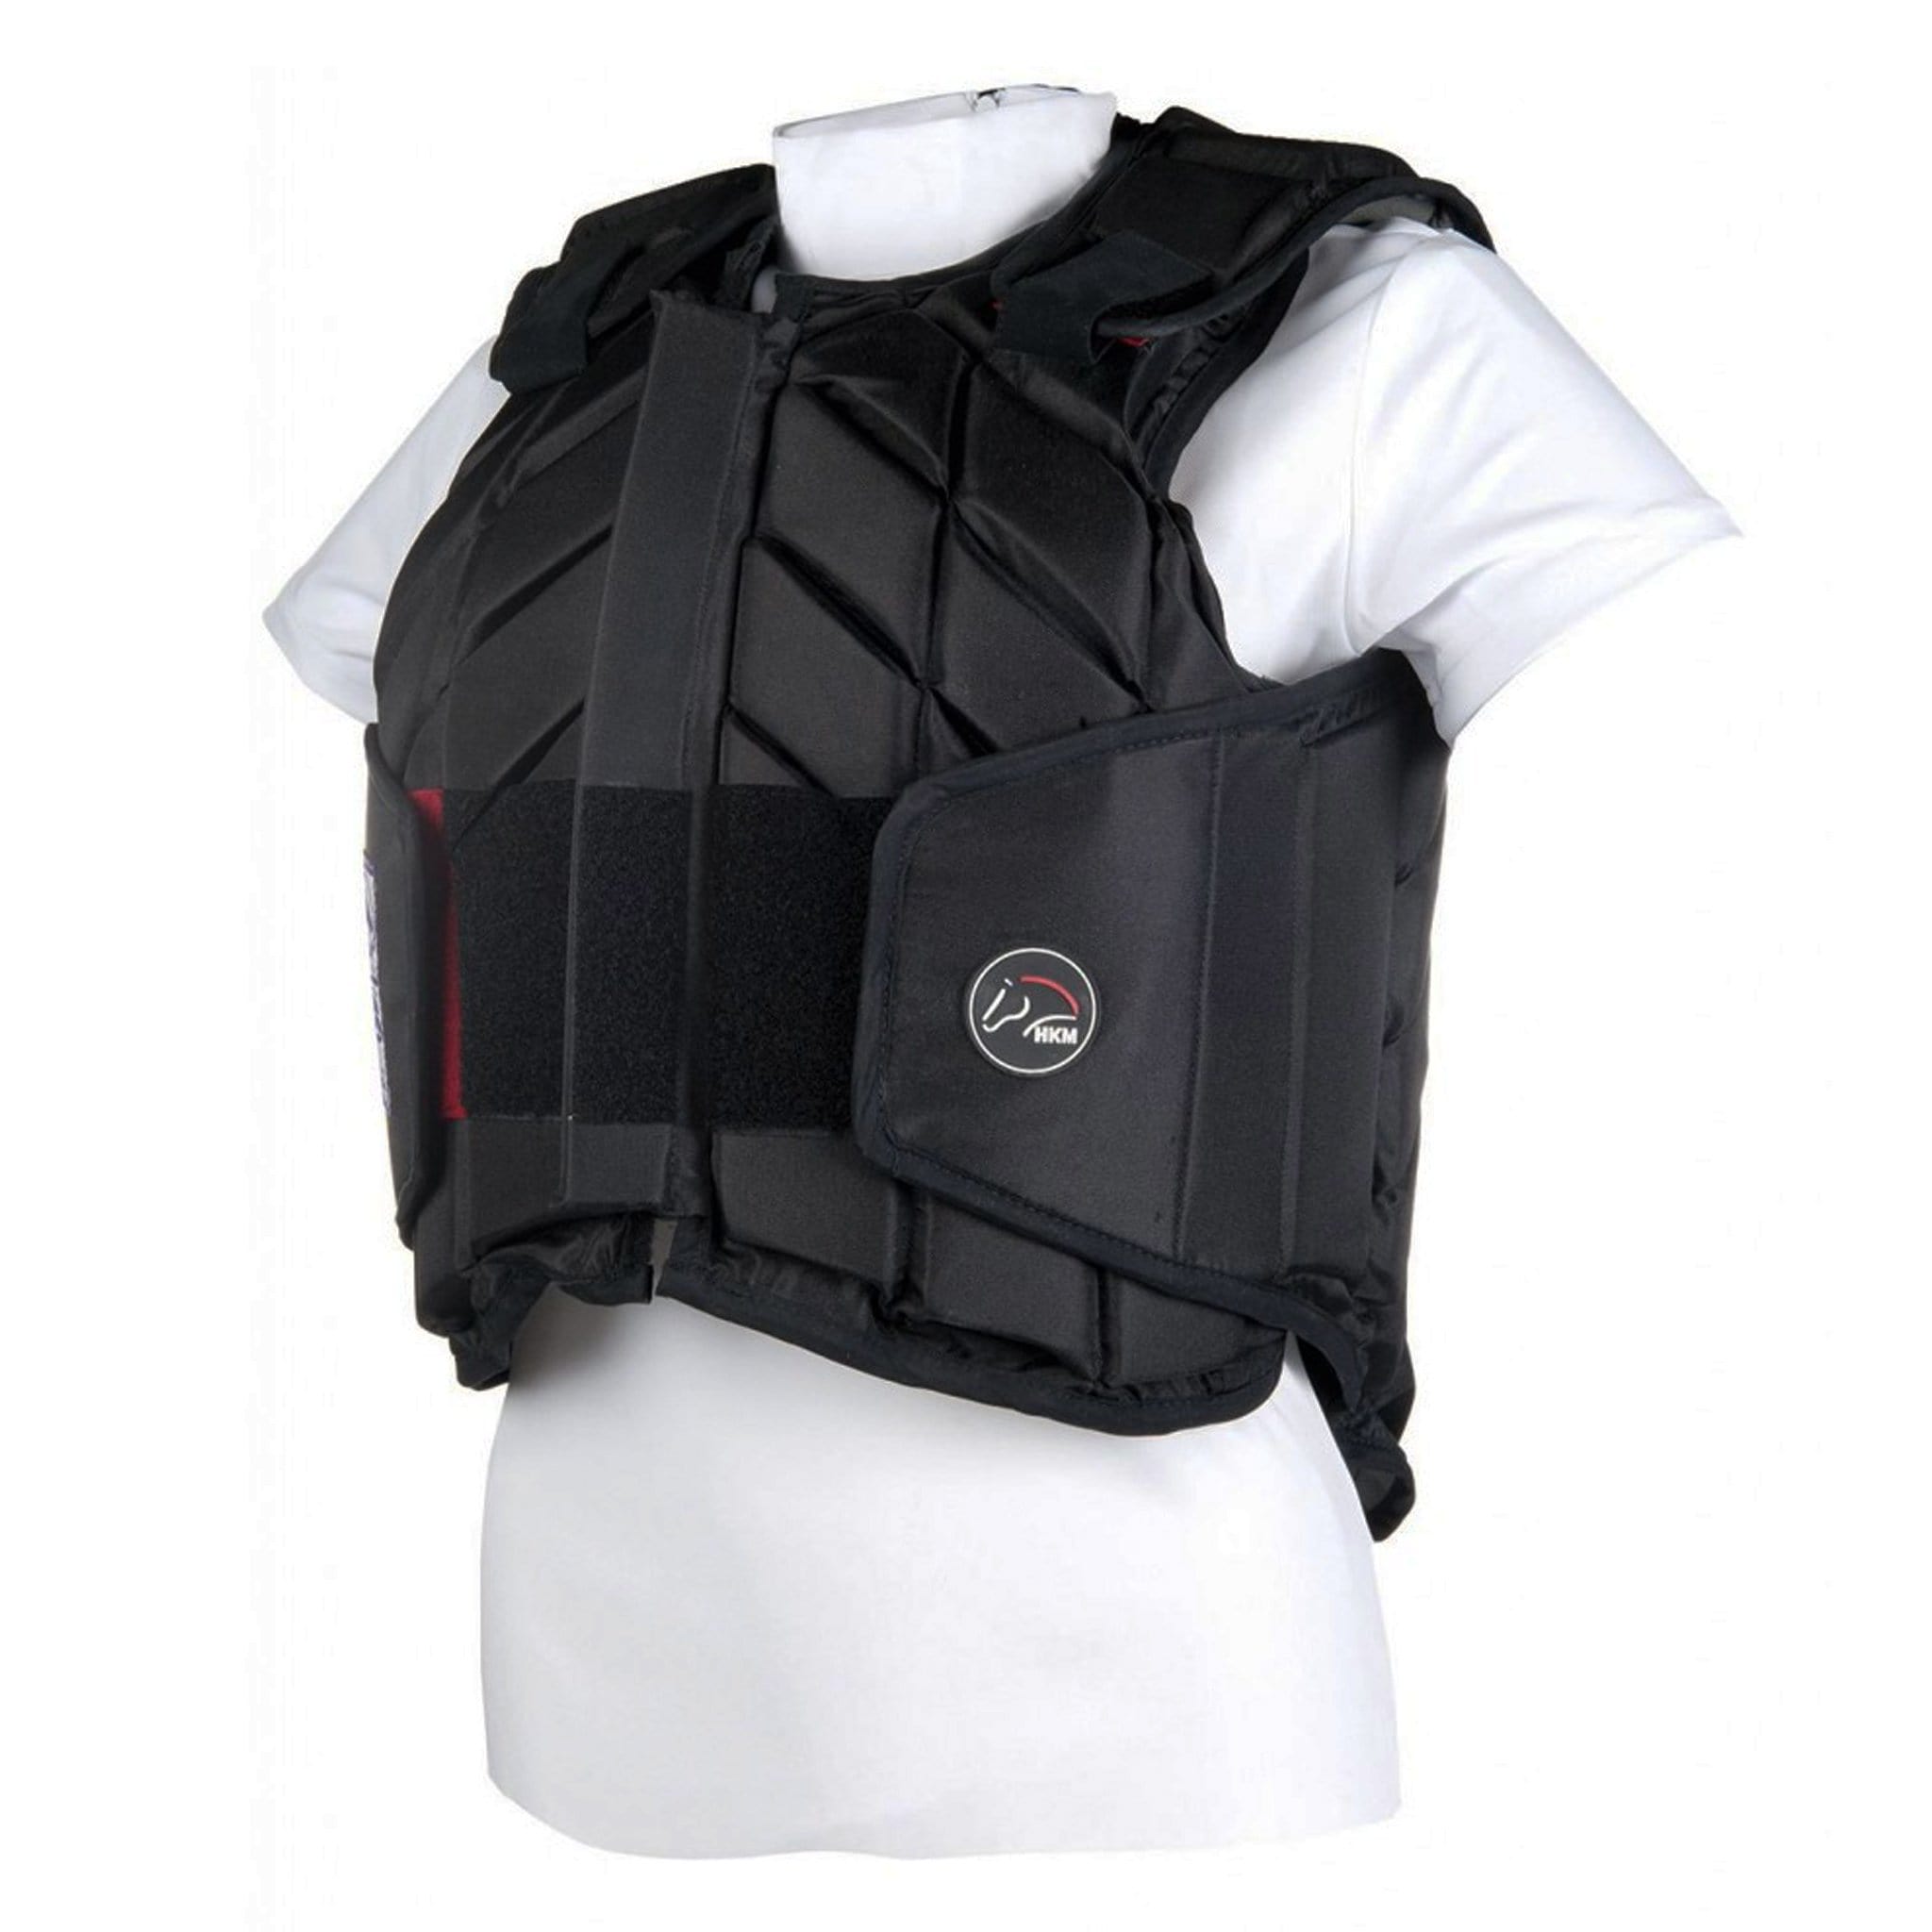 HKM Easy Fit Body Protector 10783 Black Side View